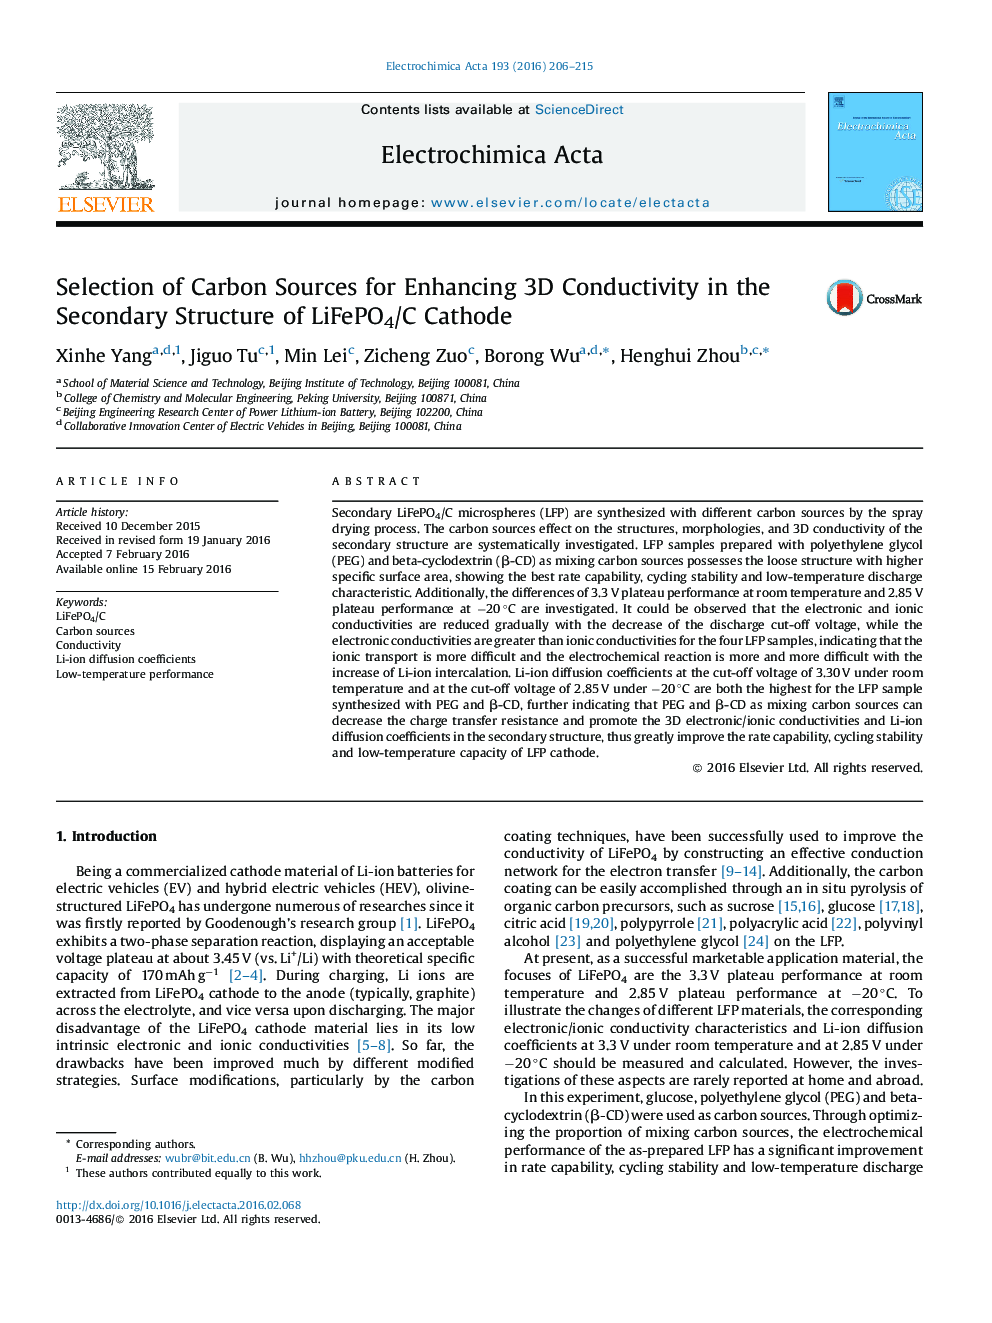 Selection of Carbon Sources for Enhancing 3D Conductivity in the Secondary Structure of LiFePO4/C Cathode